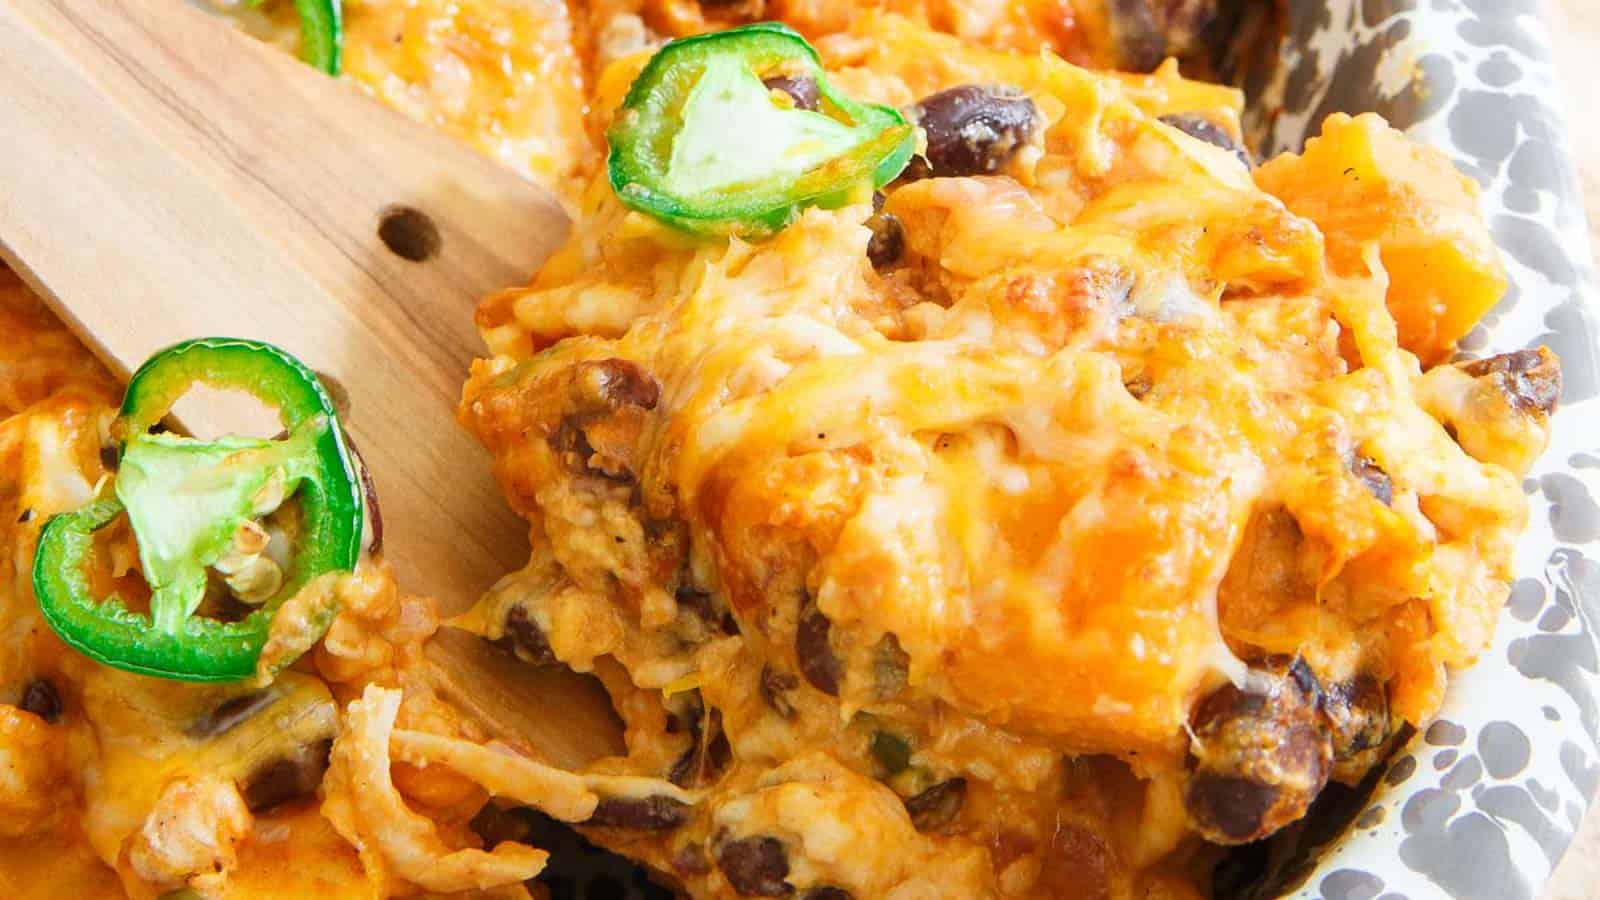 Pumpkin tortilla casserole in a baking dish with wooden serving spatula topped with jalapenos.